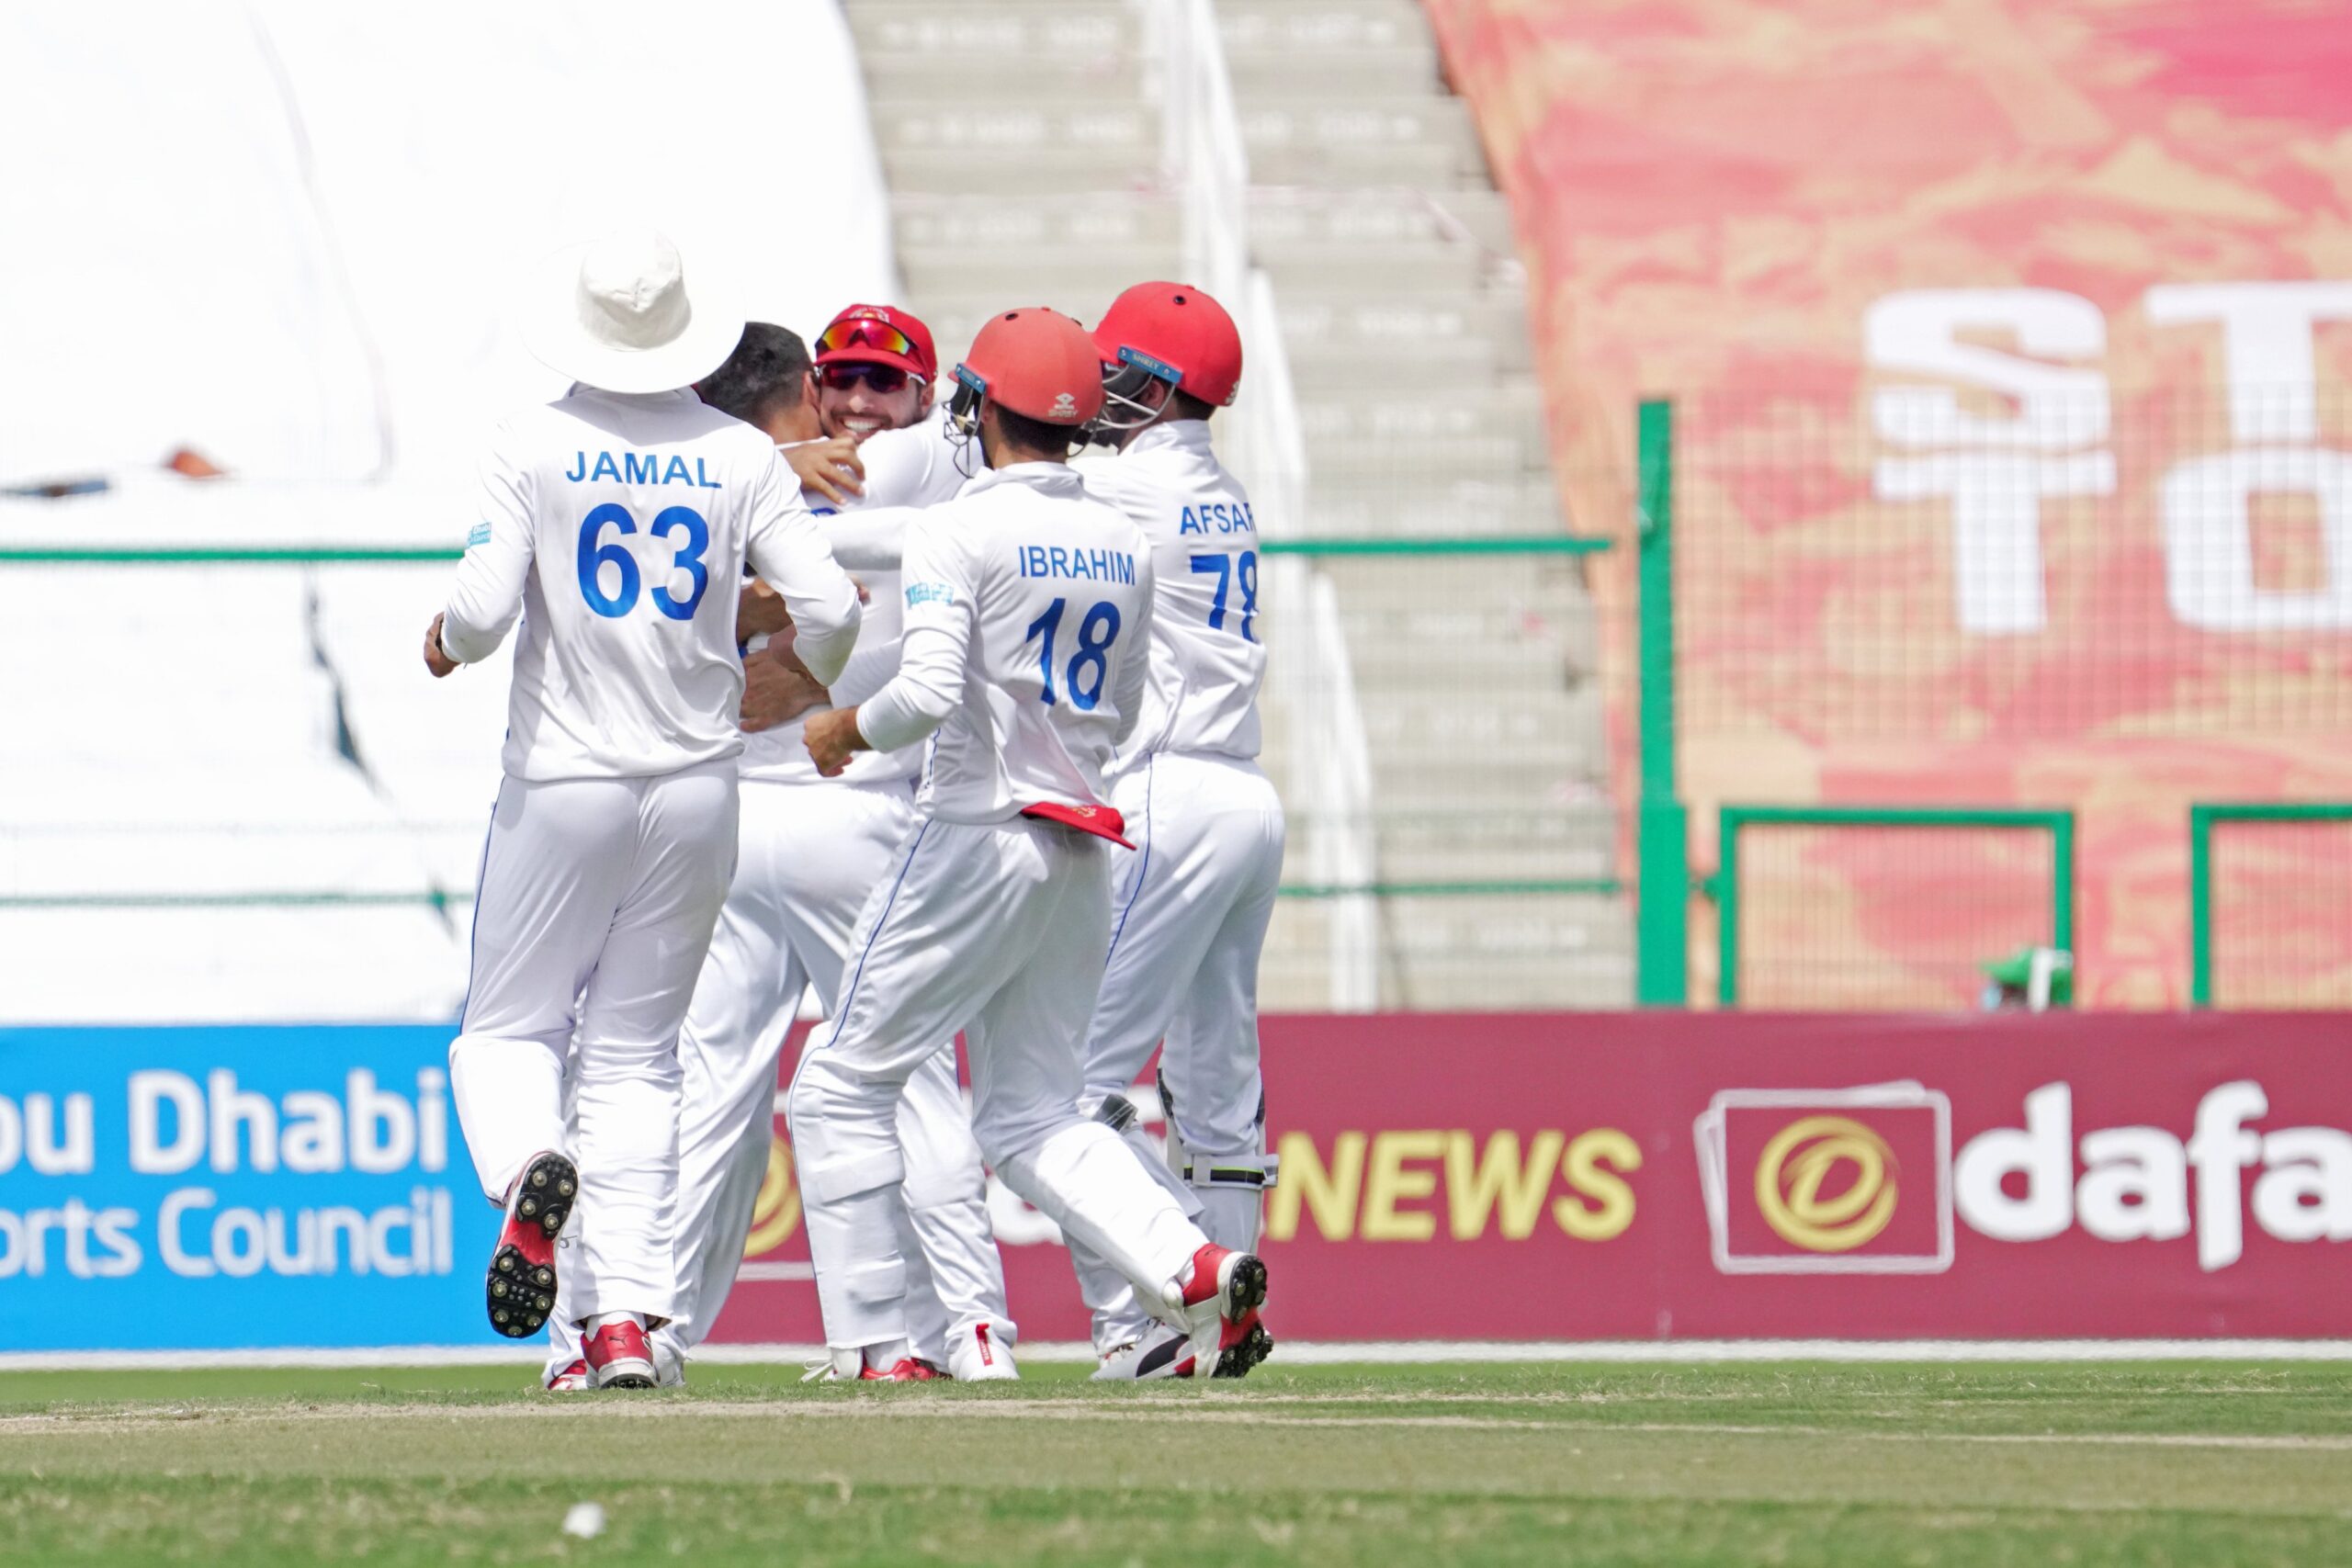 Afghanistan vs Zimbabwe 2021, 2nd Test: Day 3 – Afghanistan Are Getting Stronger After Zimbabwe's Follow-On